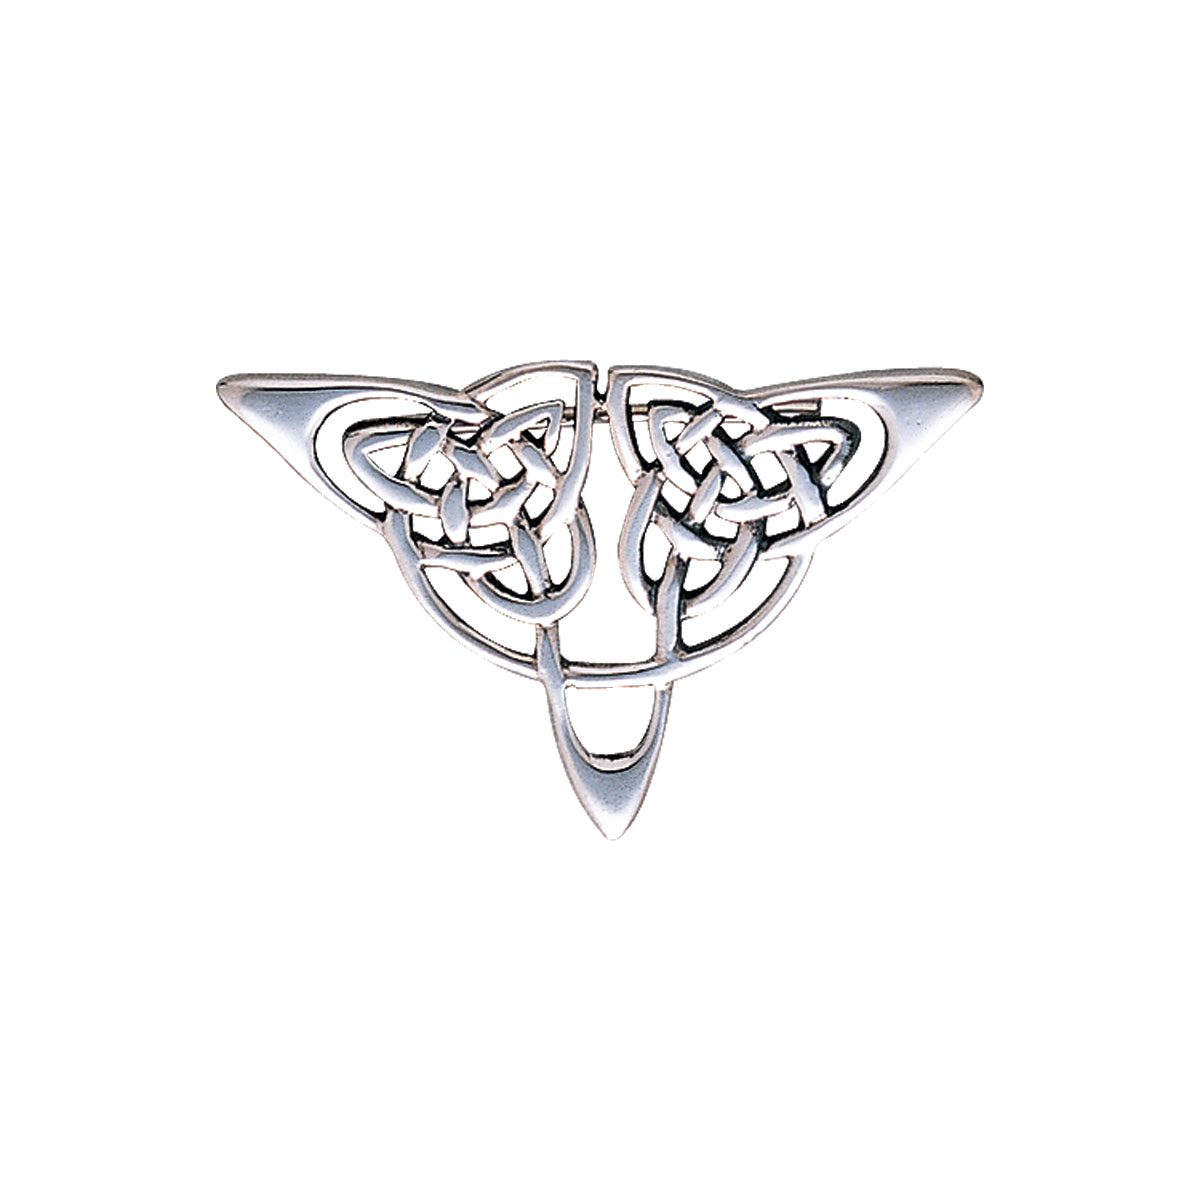 Jewelry Trends Sterling Silver Celtic Triangle Knot Brooch Pin